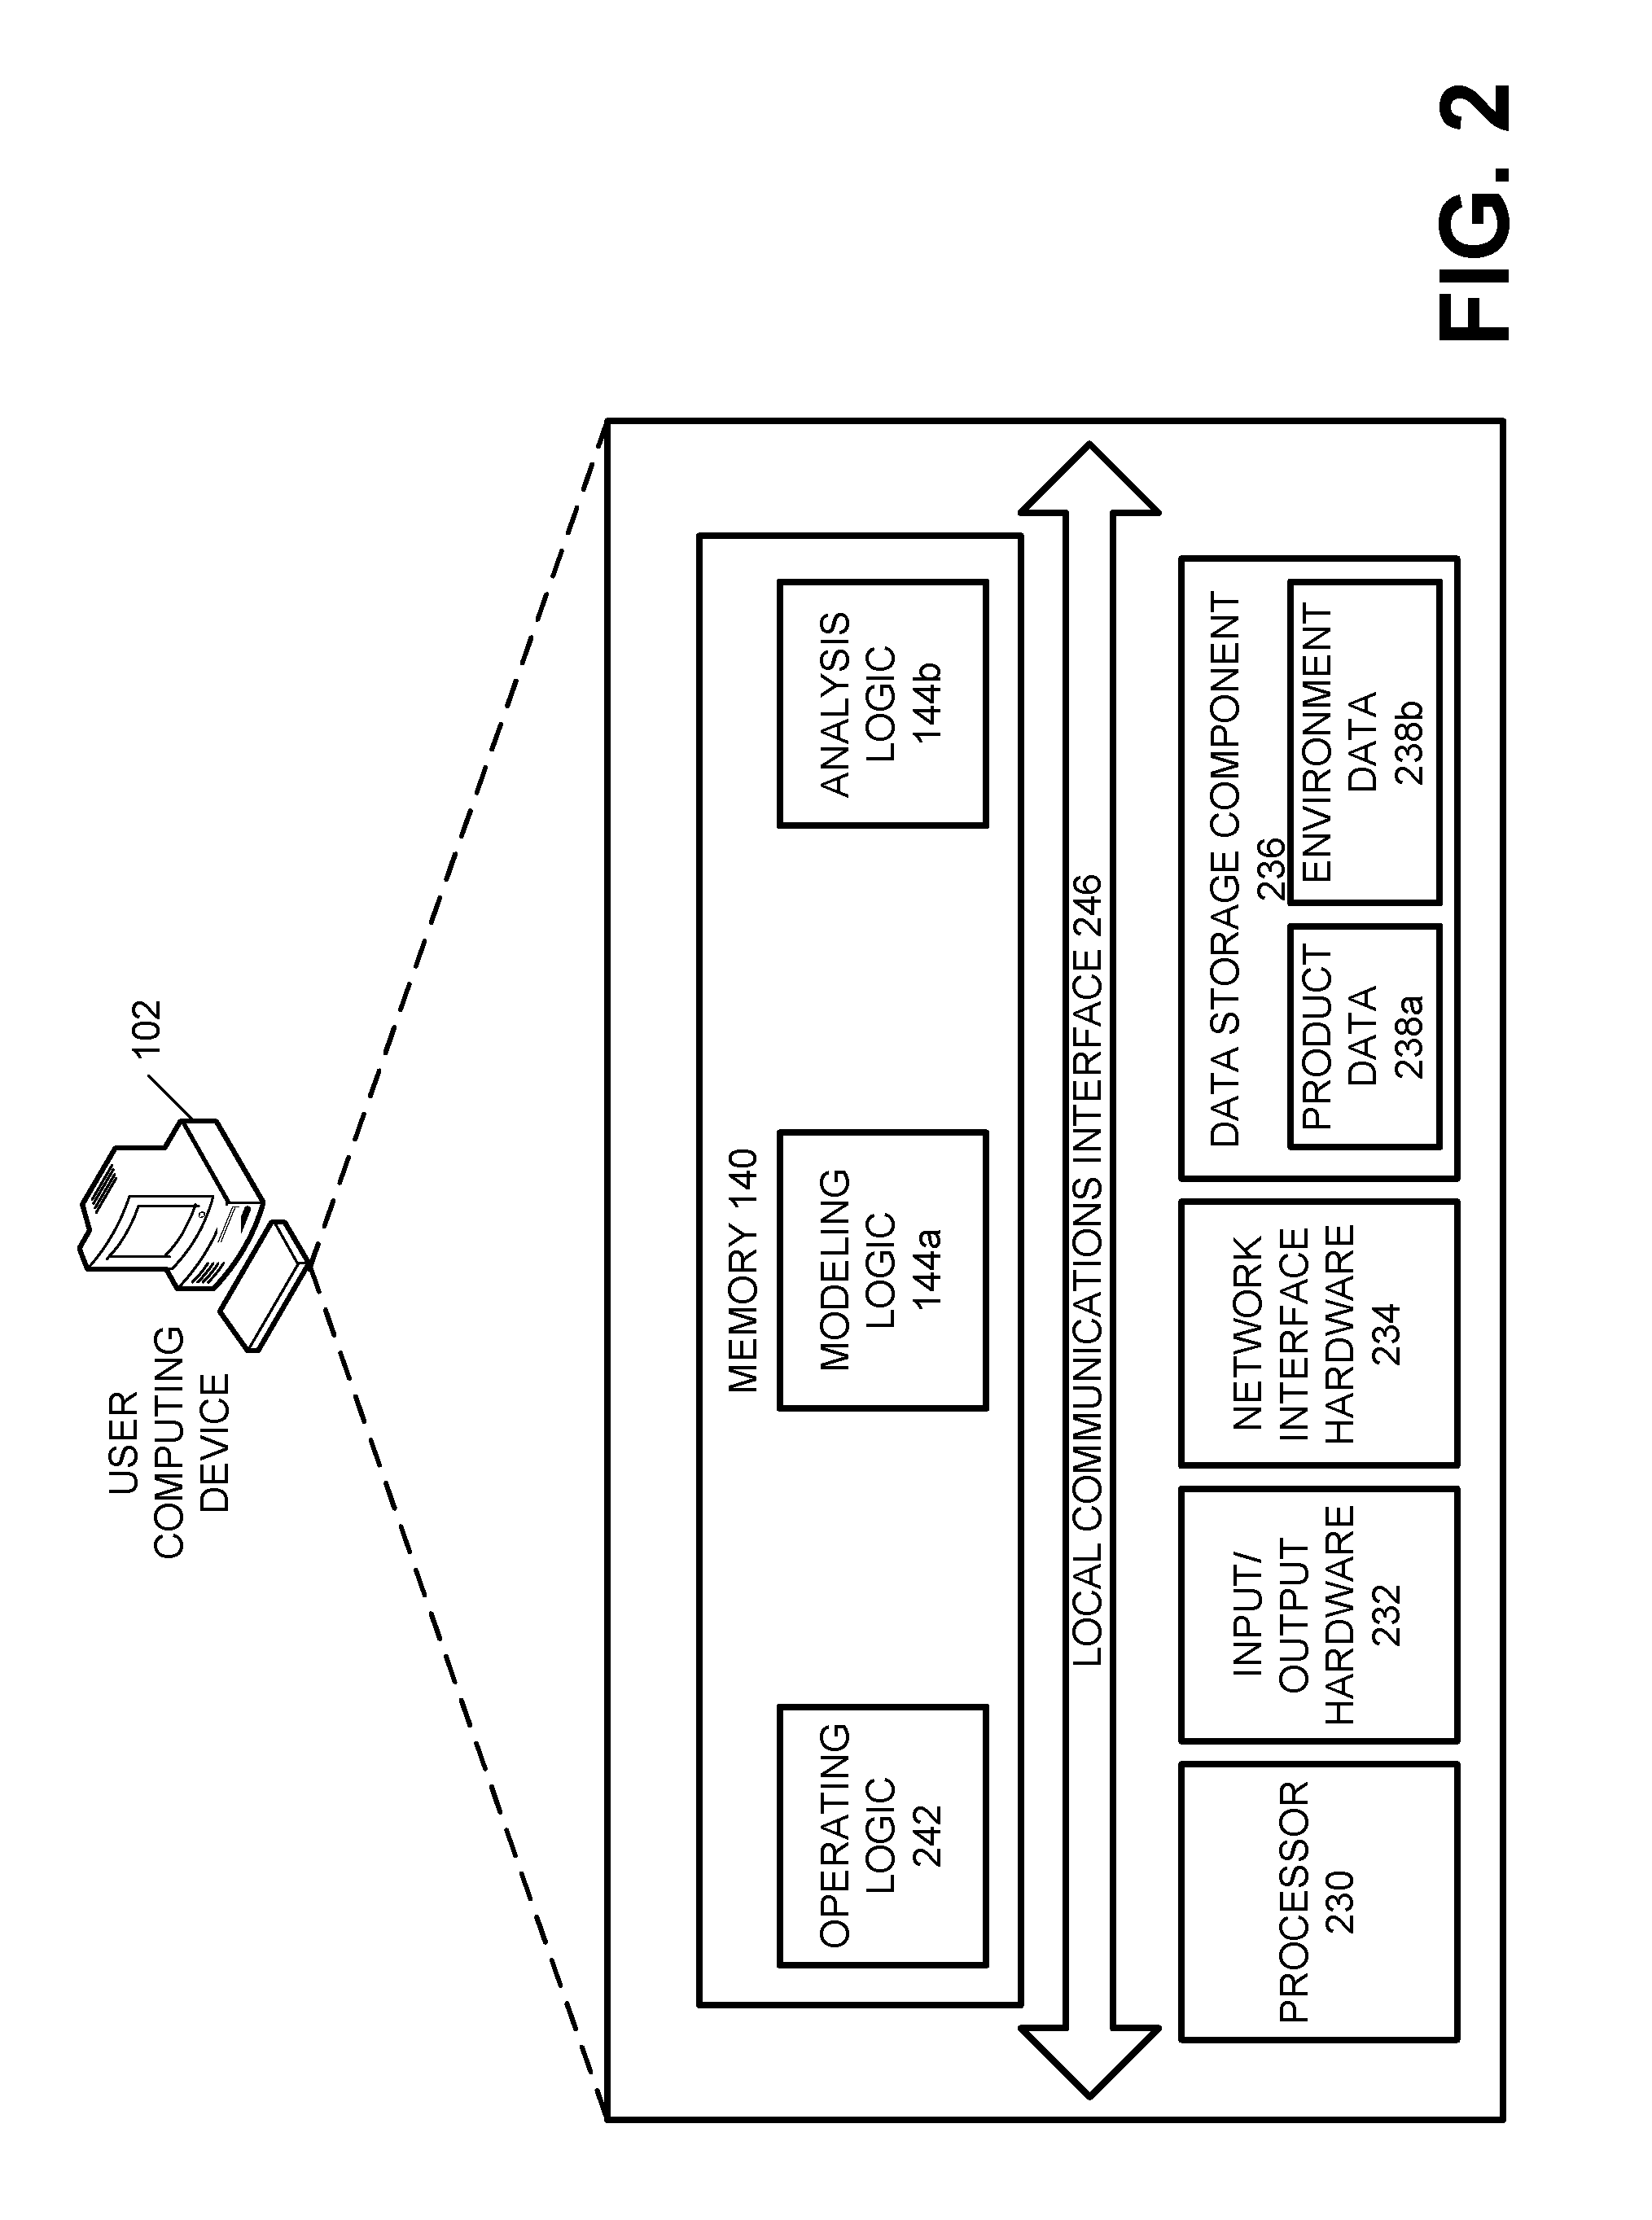 Systems and methods for product performance and perception modeling